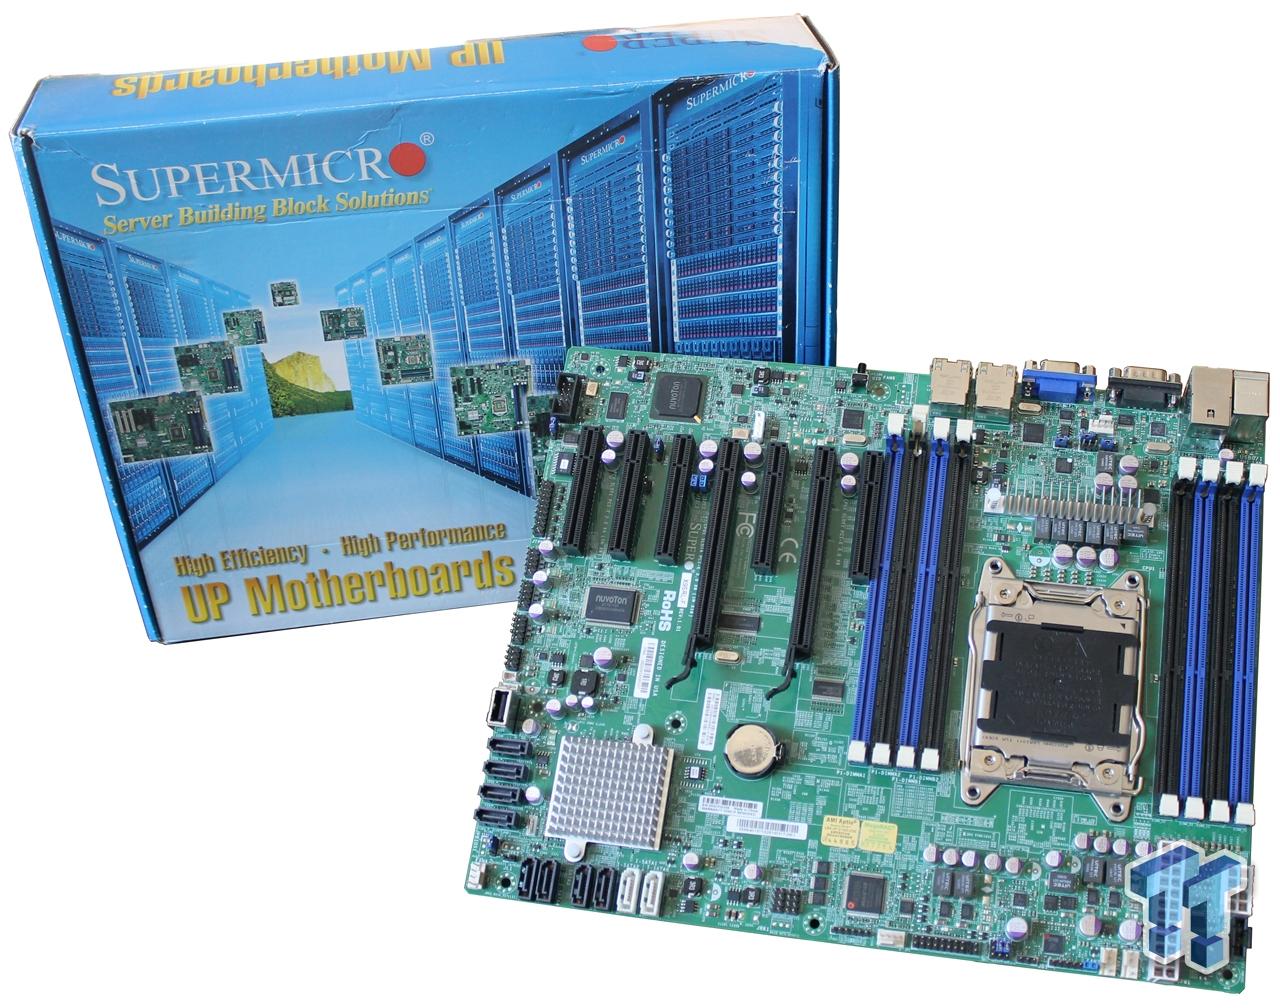 Supermicro X9SRL-F-O (Intel C602) Server Motherboard Review